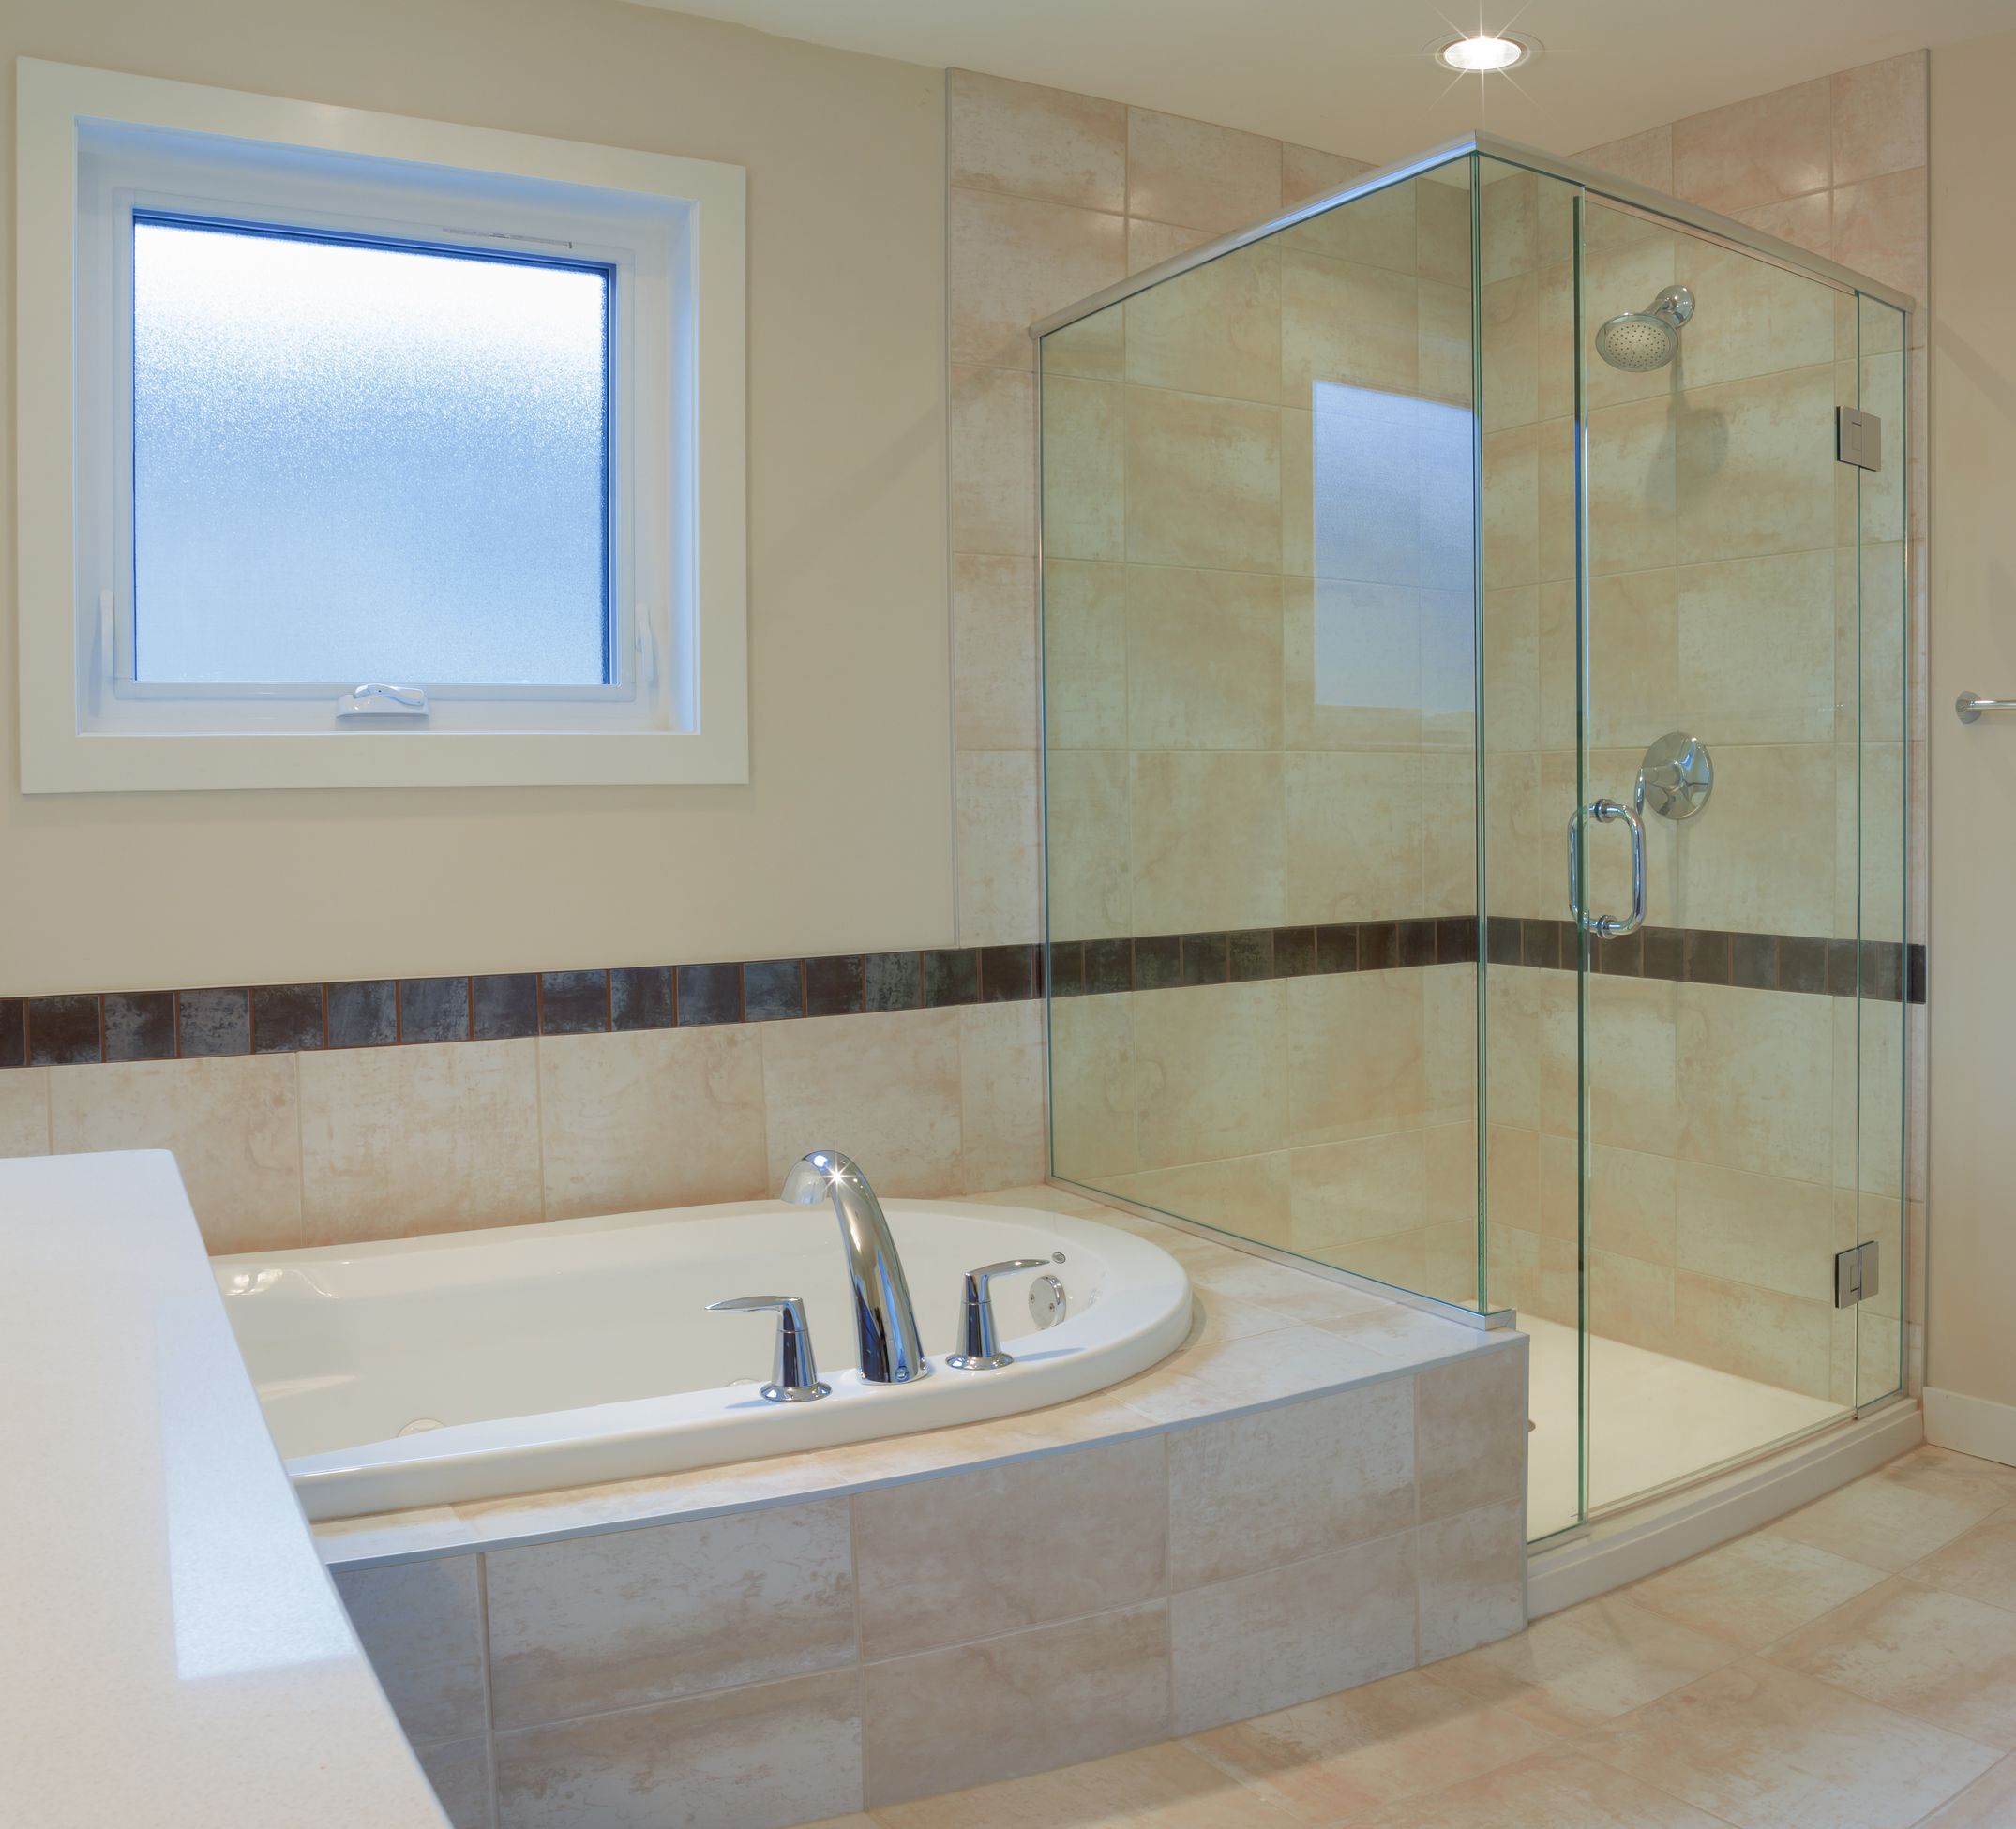 A Custom Glass Shower Enclosure in Roselle, IL Creates a Certain Ambiance for Your Bathroom